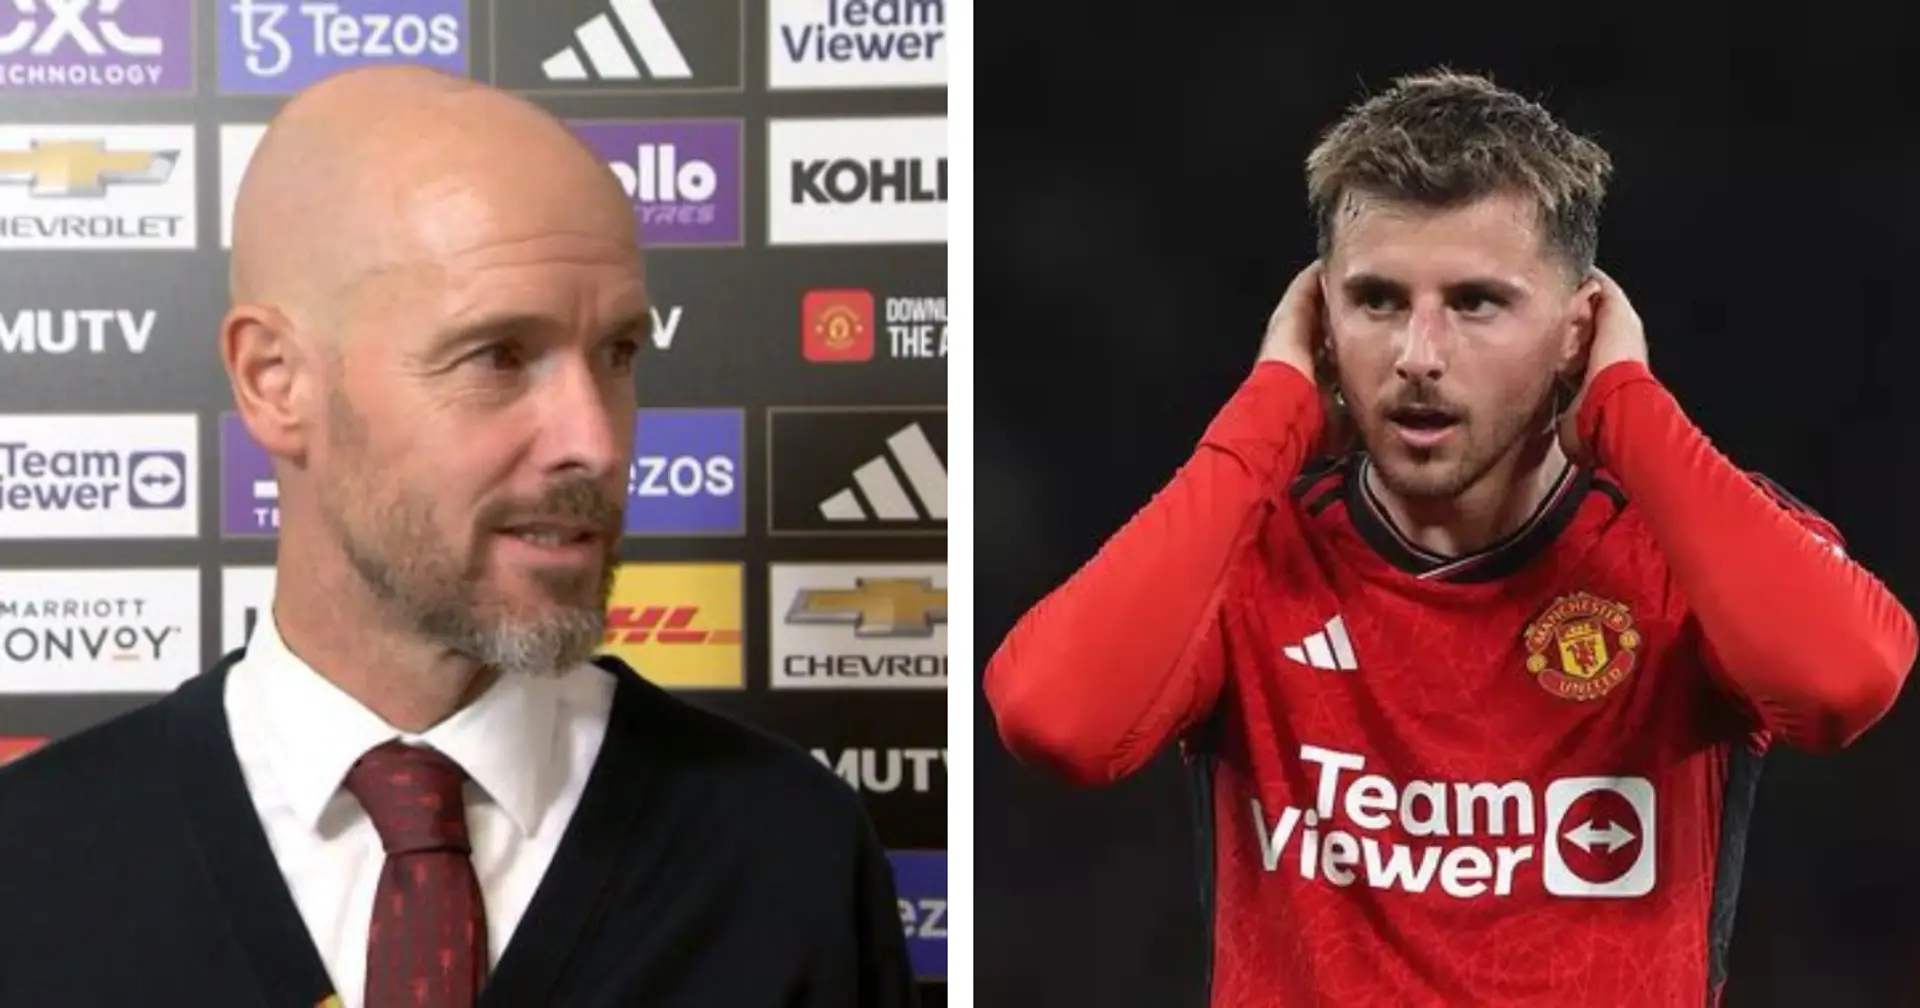 'He will play even better': Erik ten Hag sends message to Mason Mount after first really good Man United display